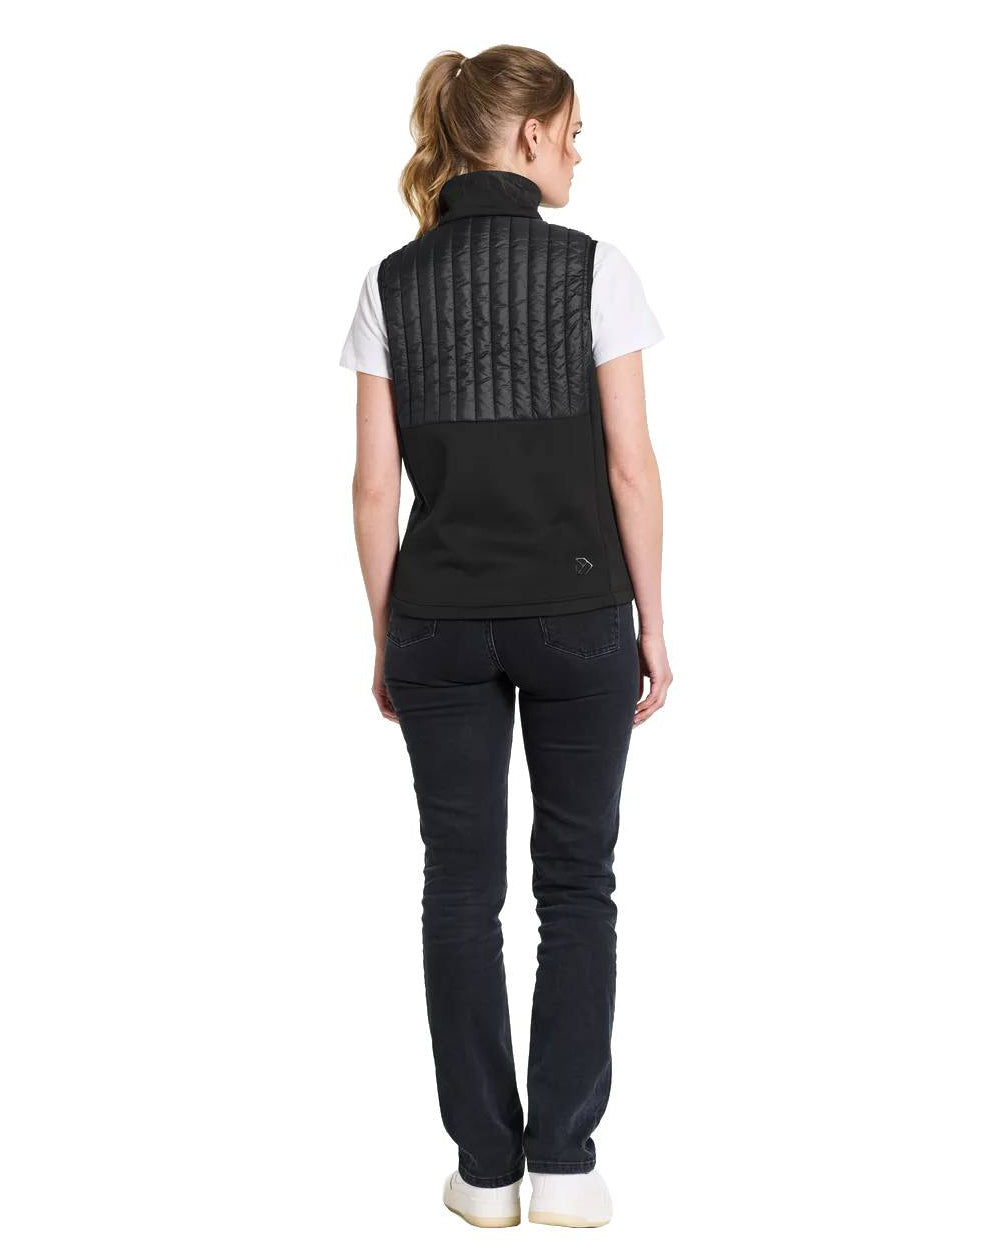 Black Coloured Didriksons Annema Womens Vest On A White Background 